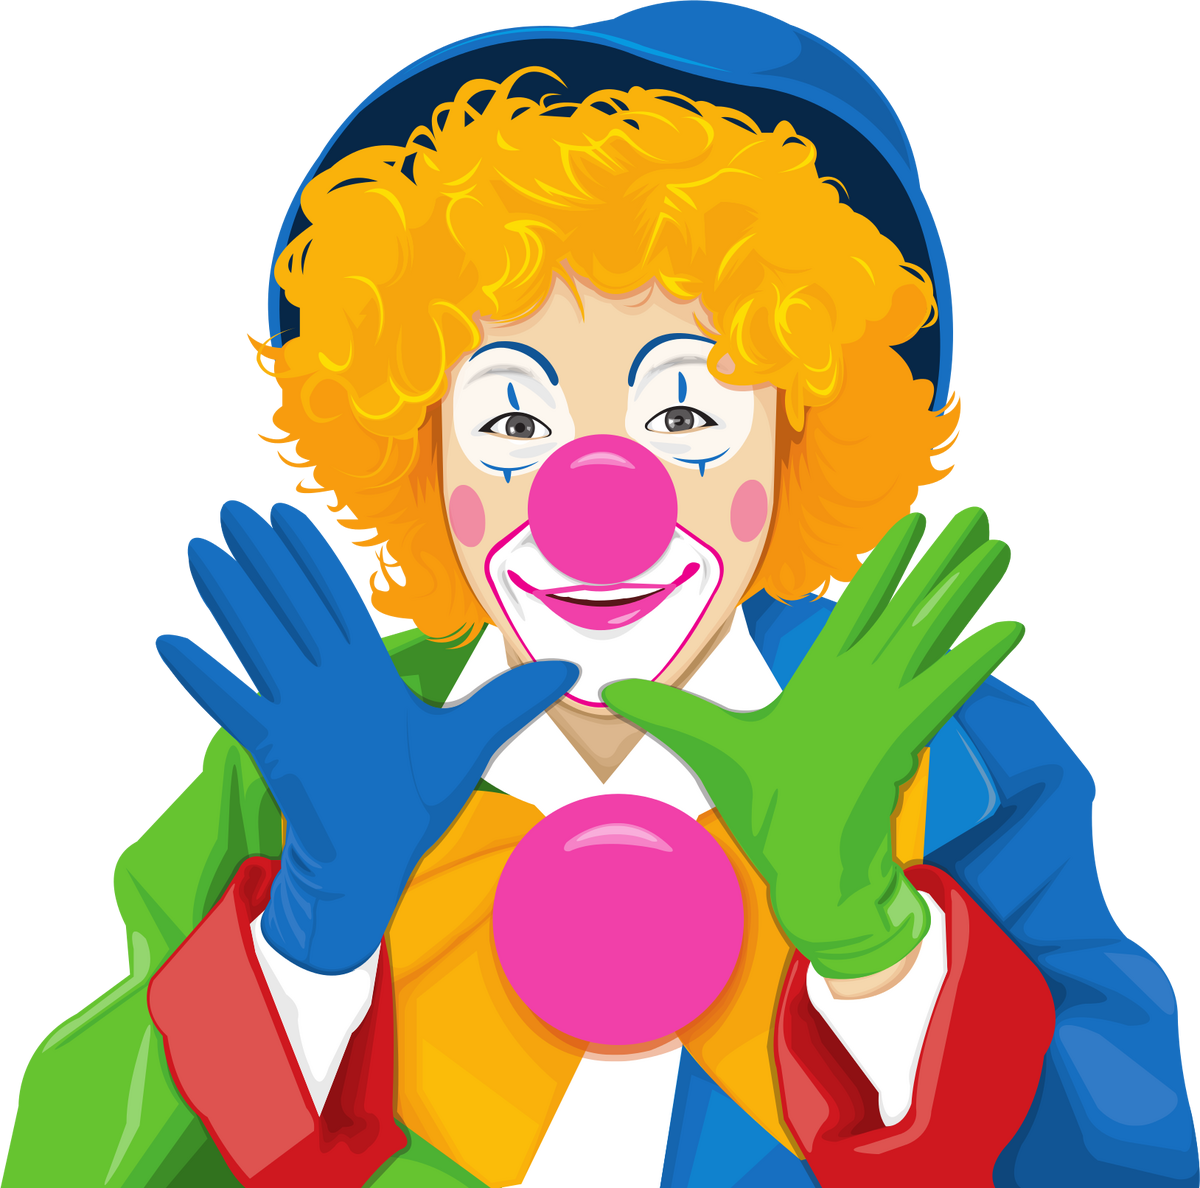 Tricky the Clown/scp-4648, Wiki